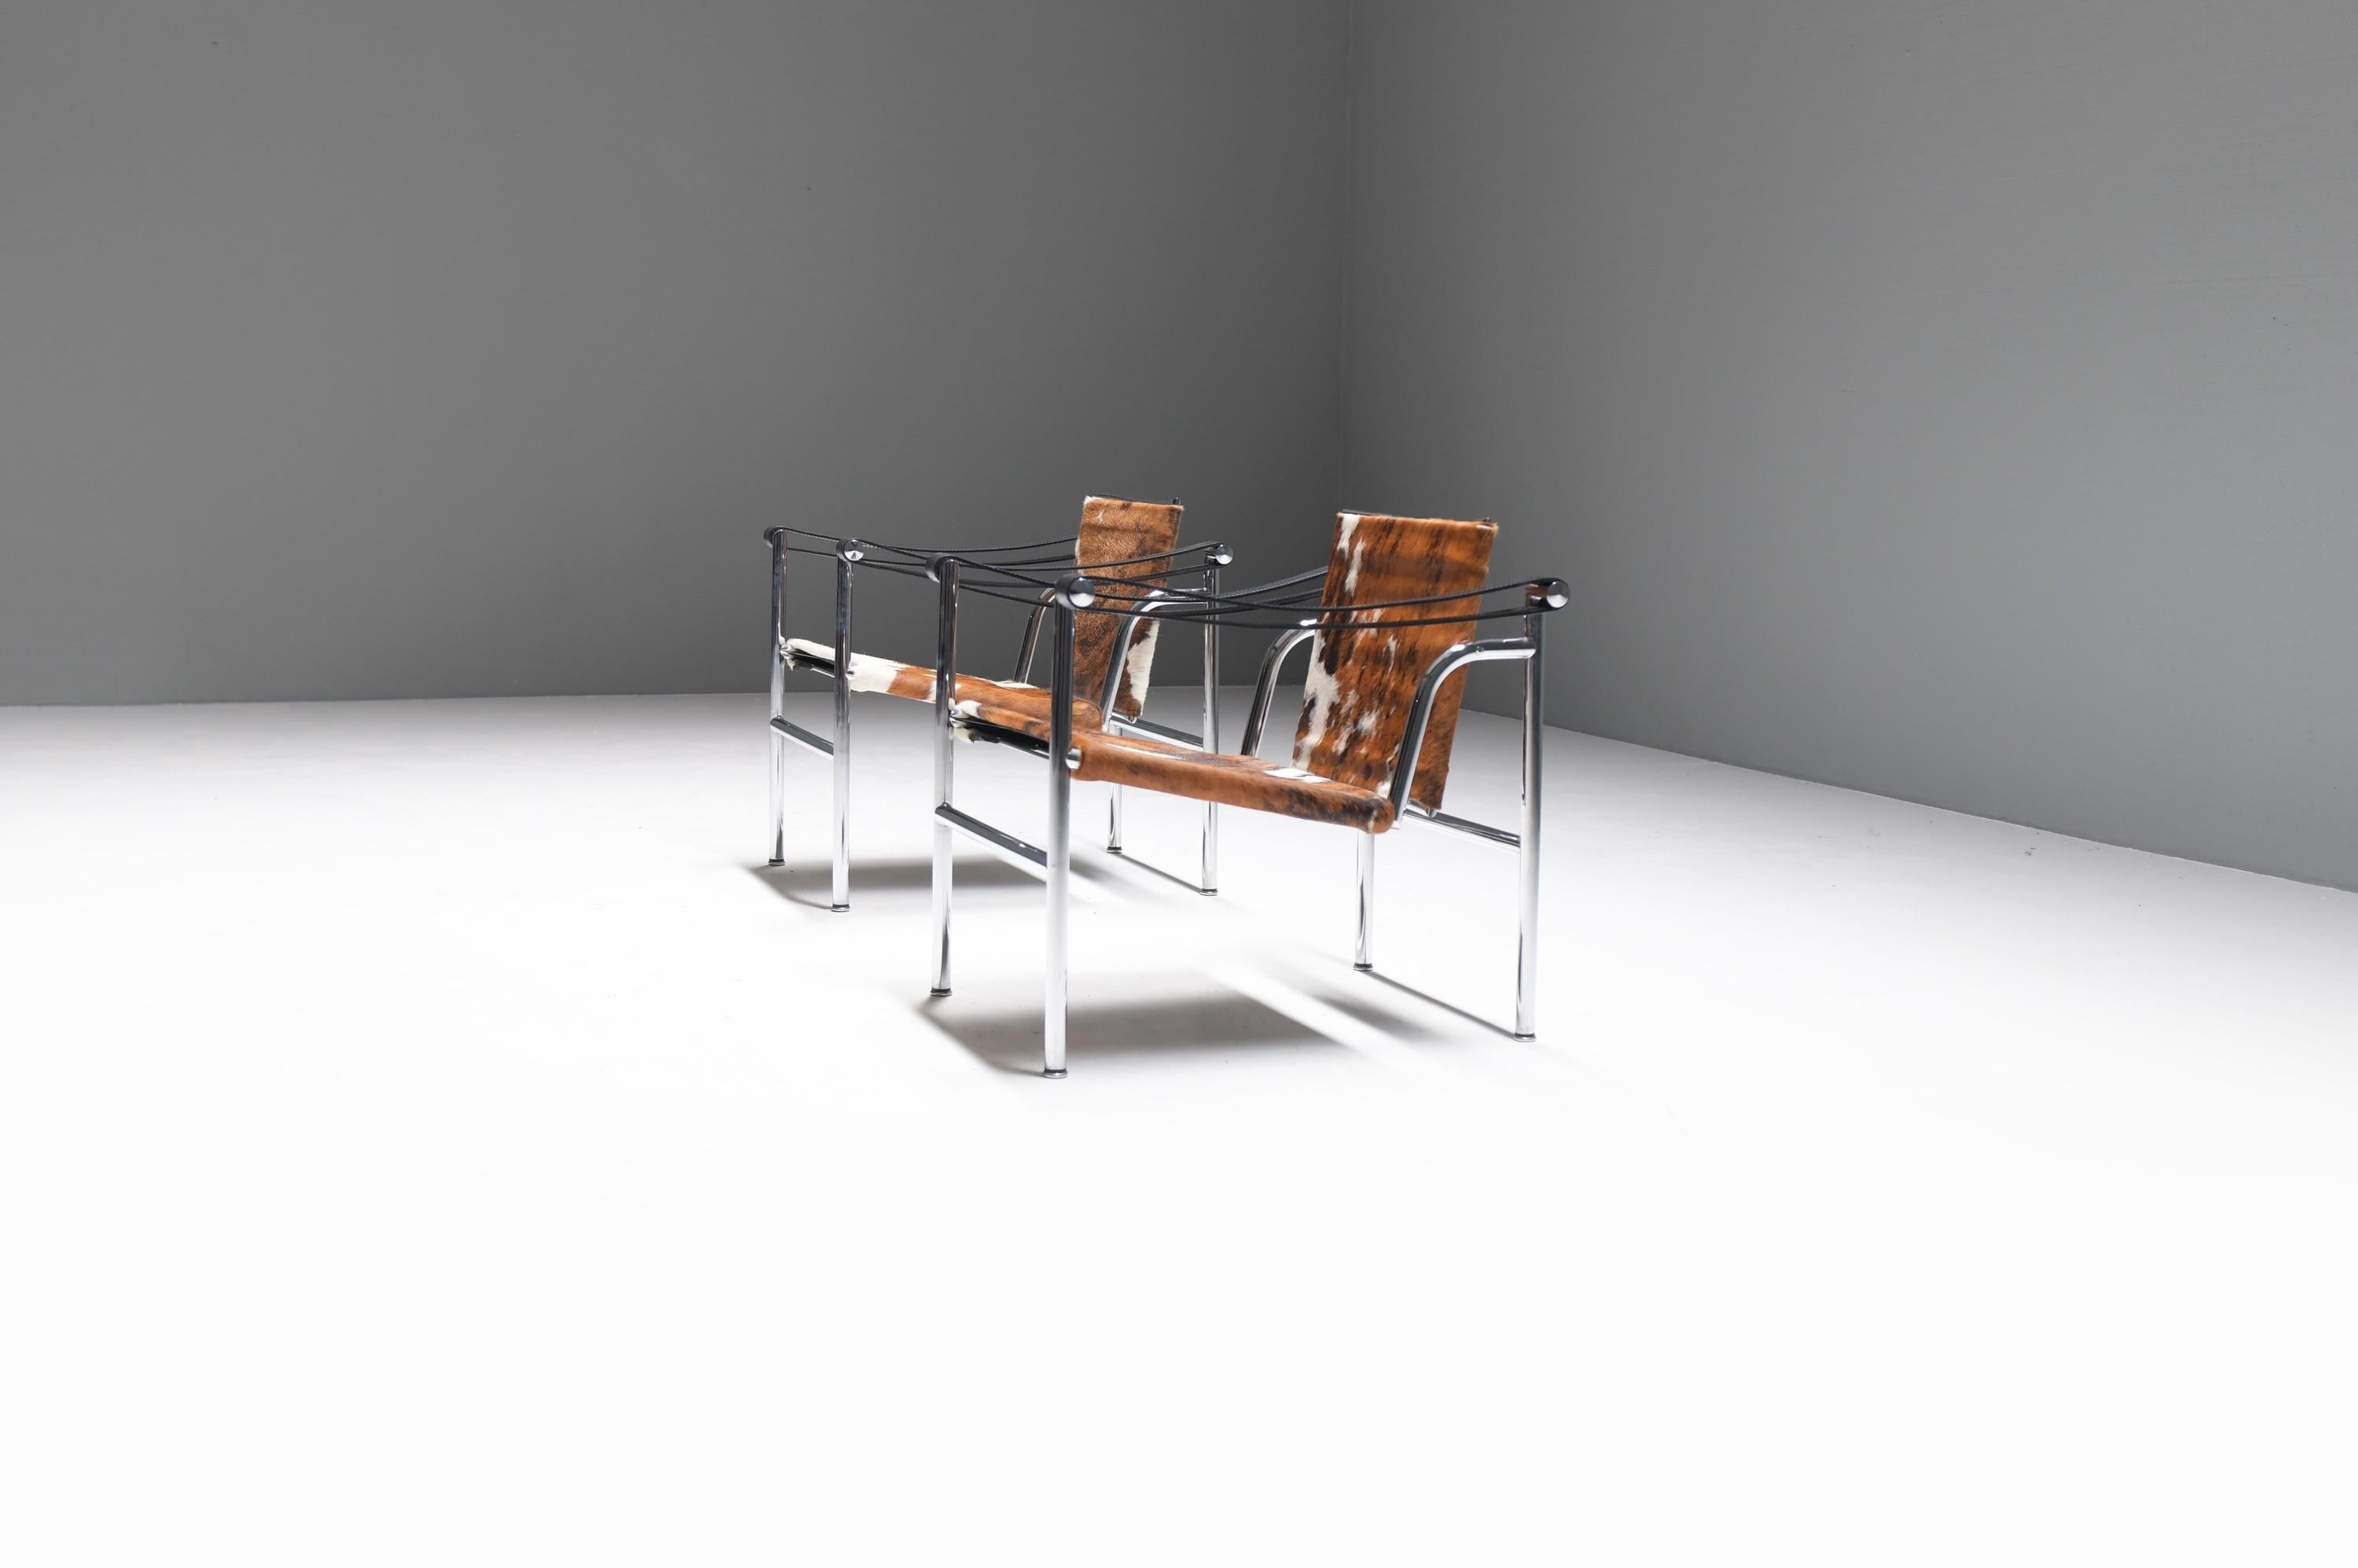 20th Century LC 1 set in horse skin - Le Corbusier, Jeanneret & Charlotte Perriand - Cassina For Sale